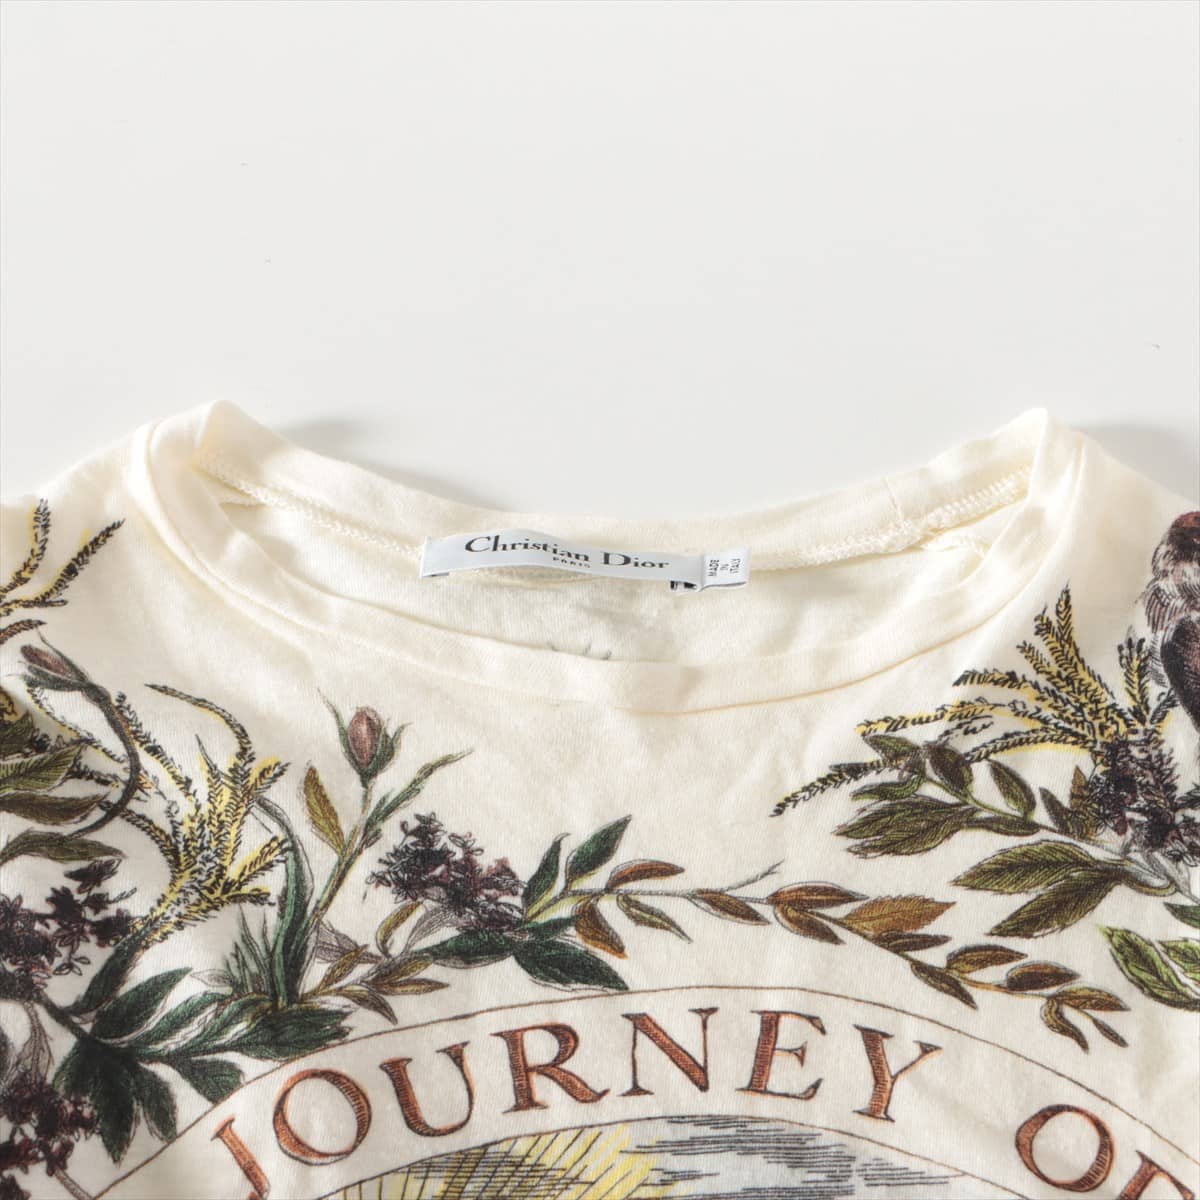 Christian Dior Cotton & linen T-shirt XS Ladies' Ivory  THE BRUTAL JOURNEY OF THE HEART There is an odor